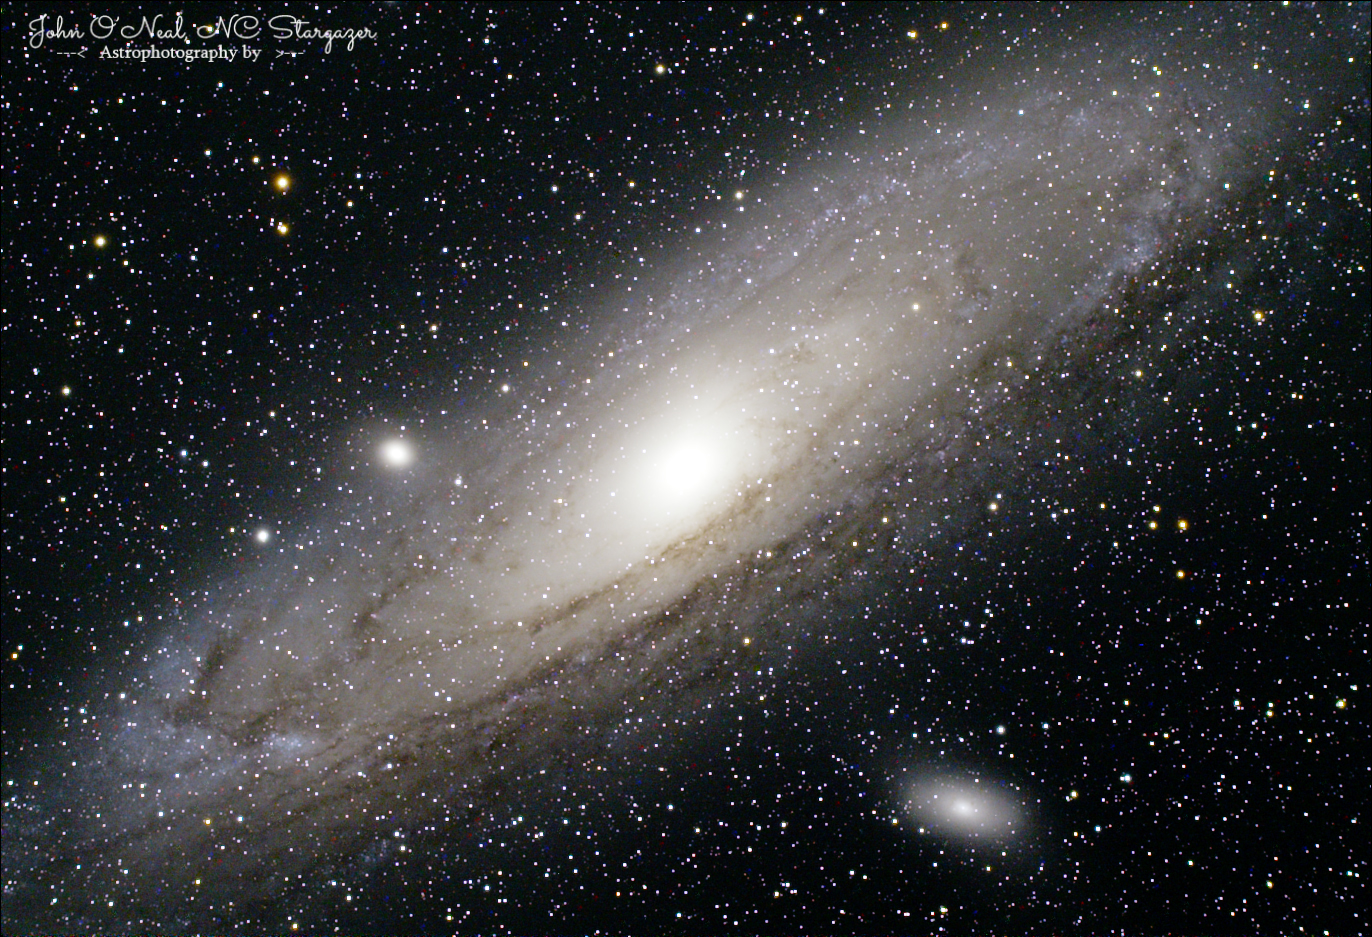 Our closest galactic neighbor, the Great Andromeda Galaxy